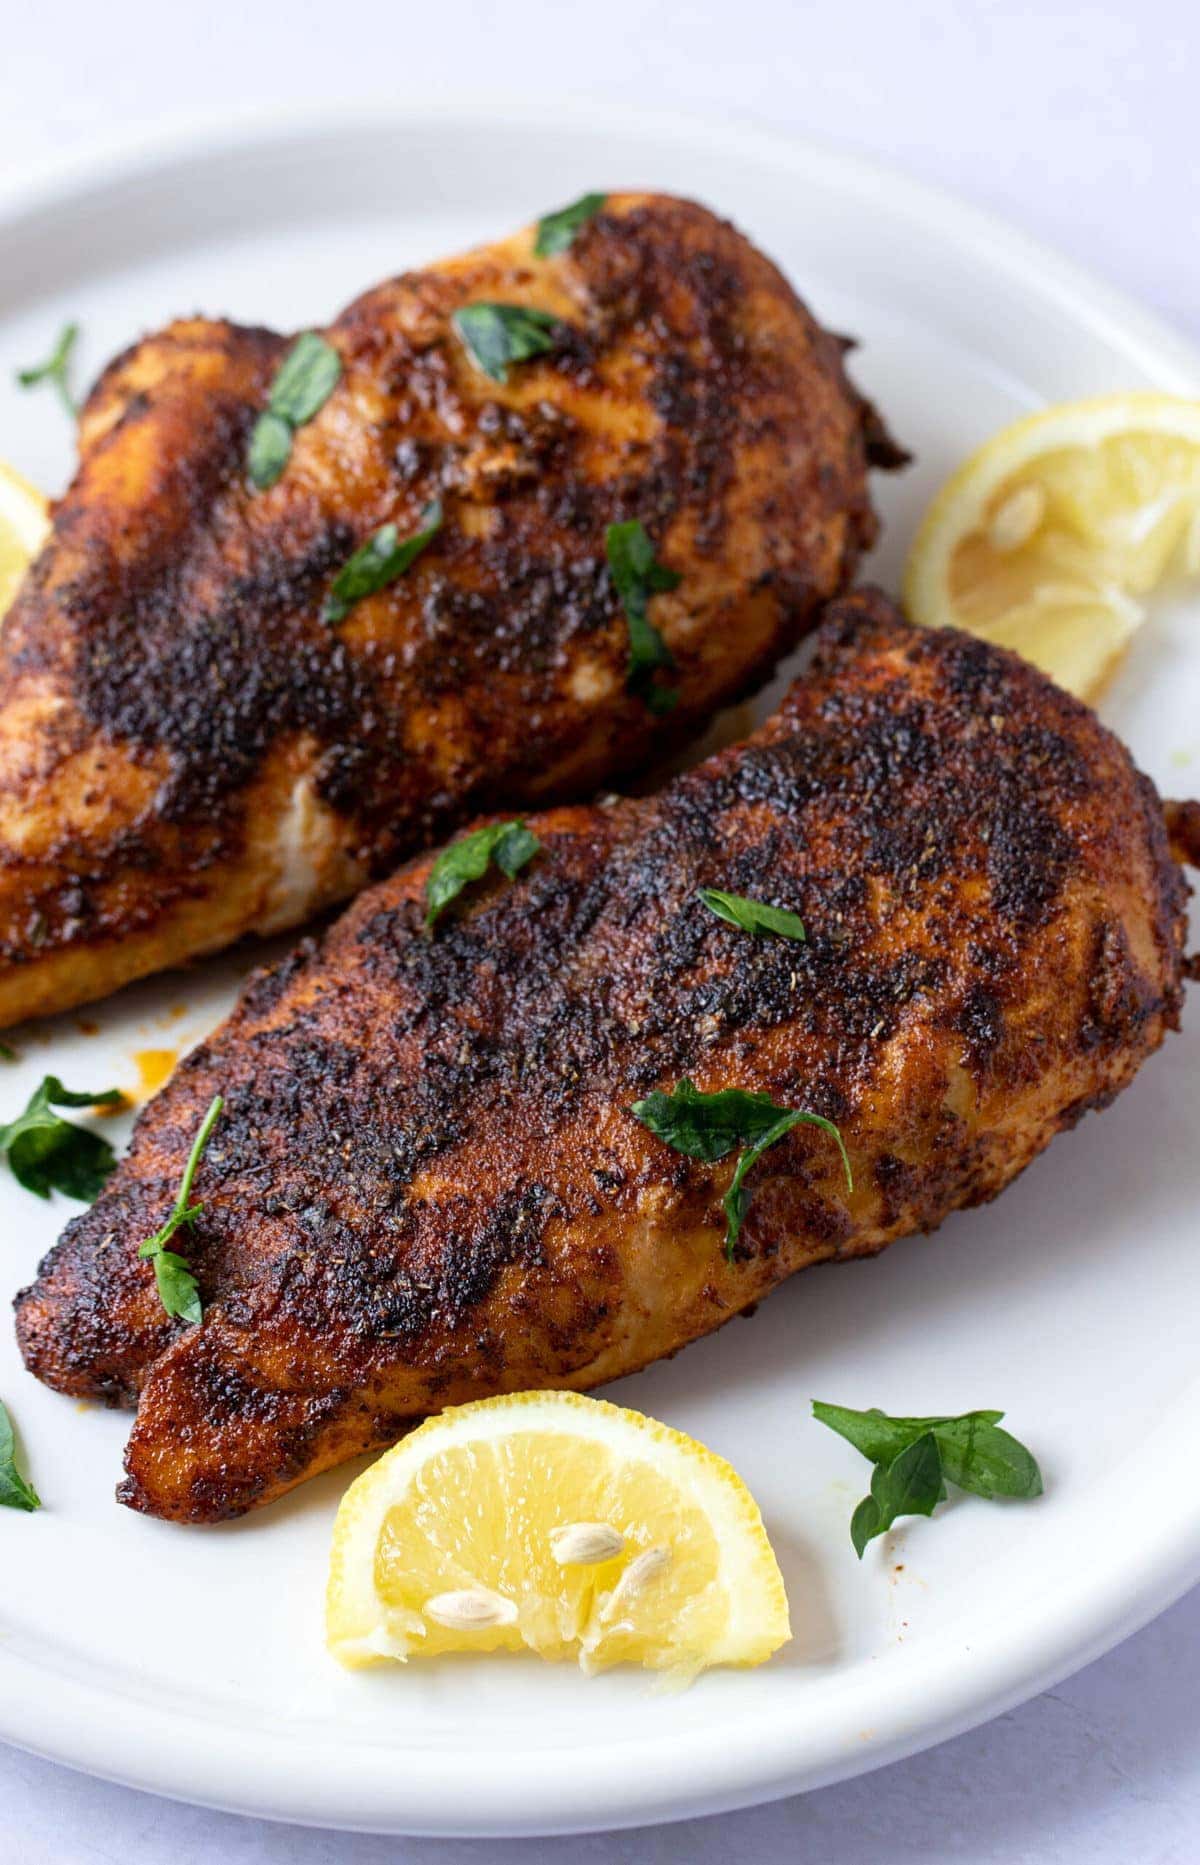 Easy Chicken Recipes for Dinners with Few Ingredients - 40 Aprons